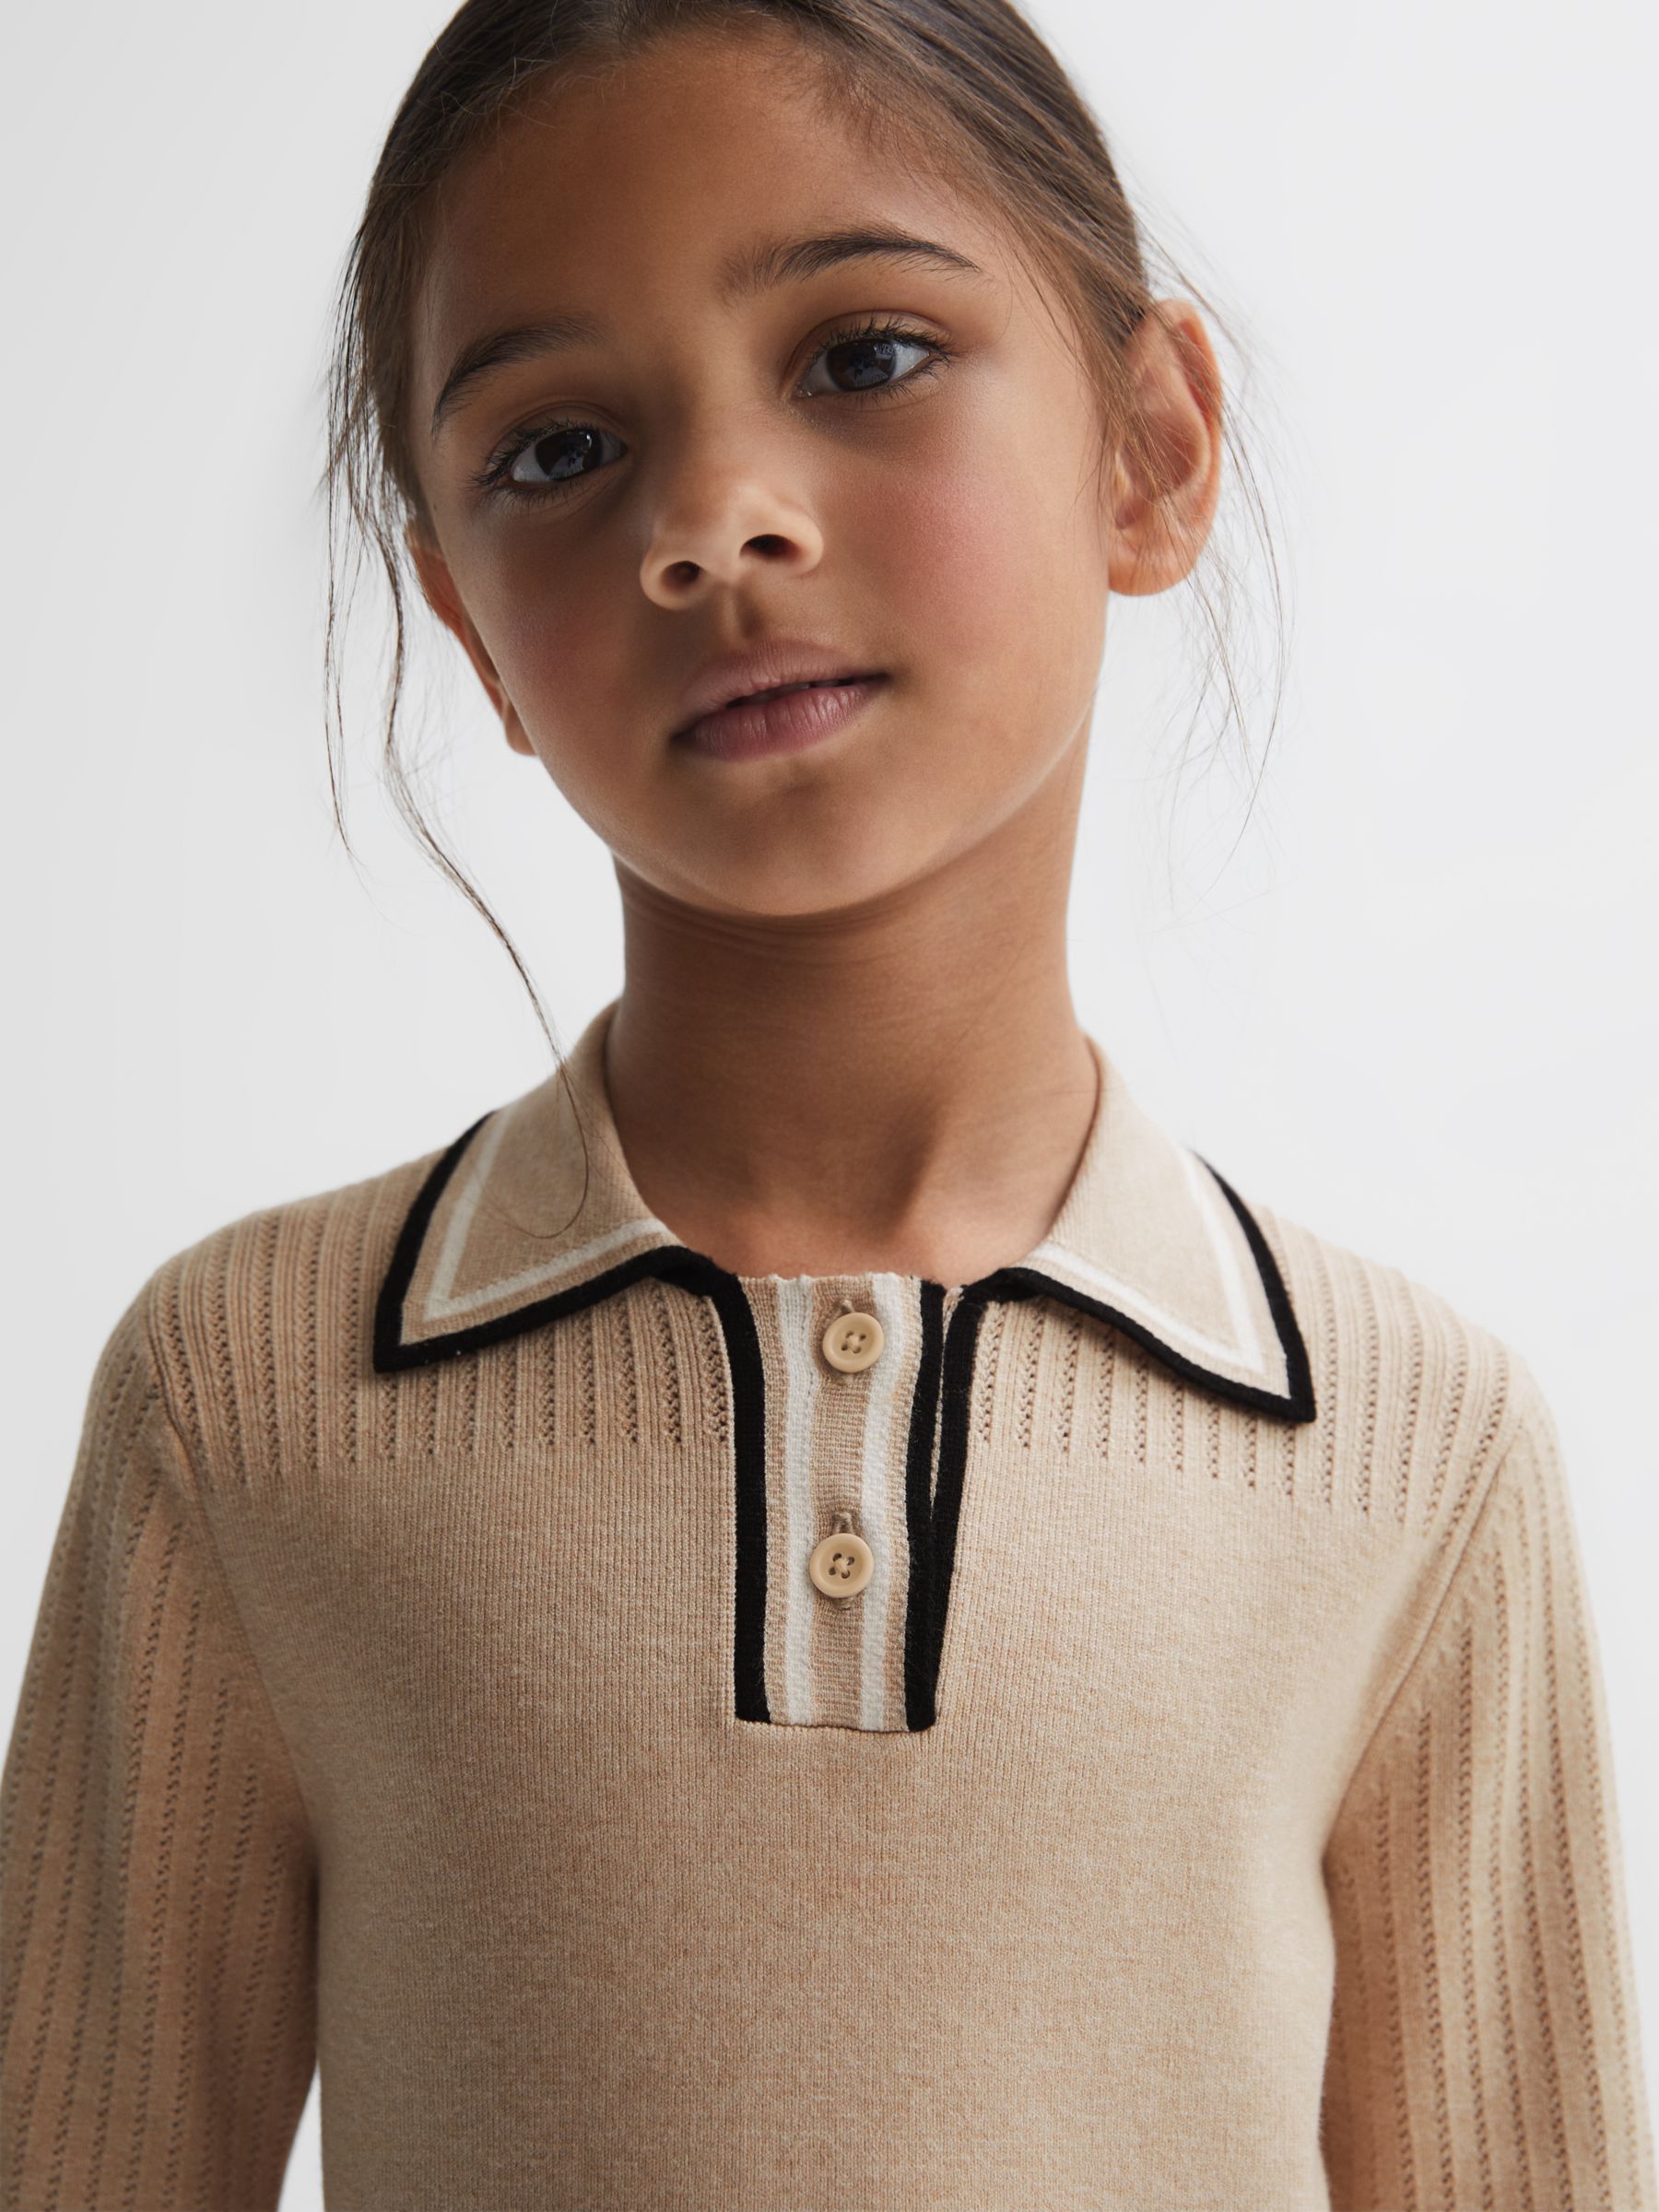 Reiss Kids' Ruby Knitted Polo Dress, Camel, 5-6 years